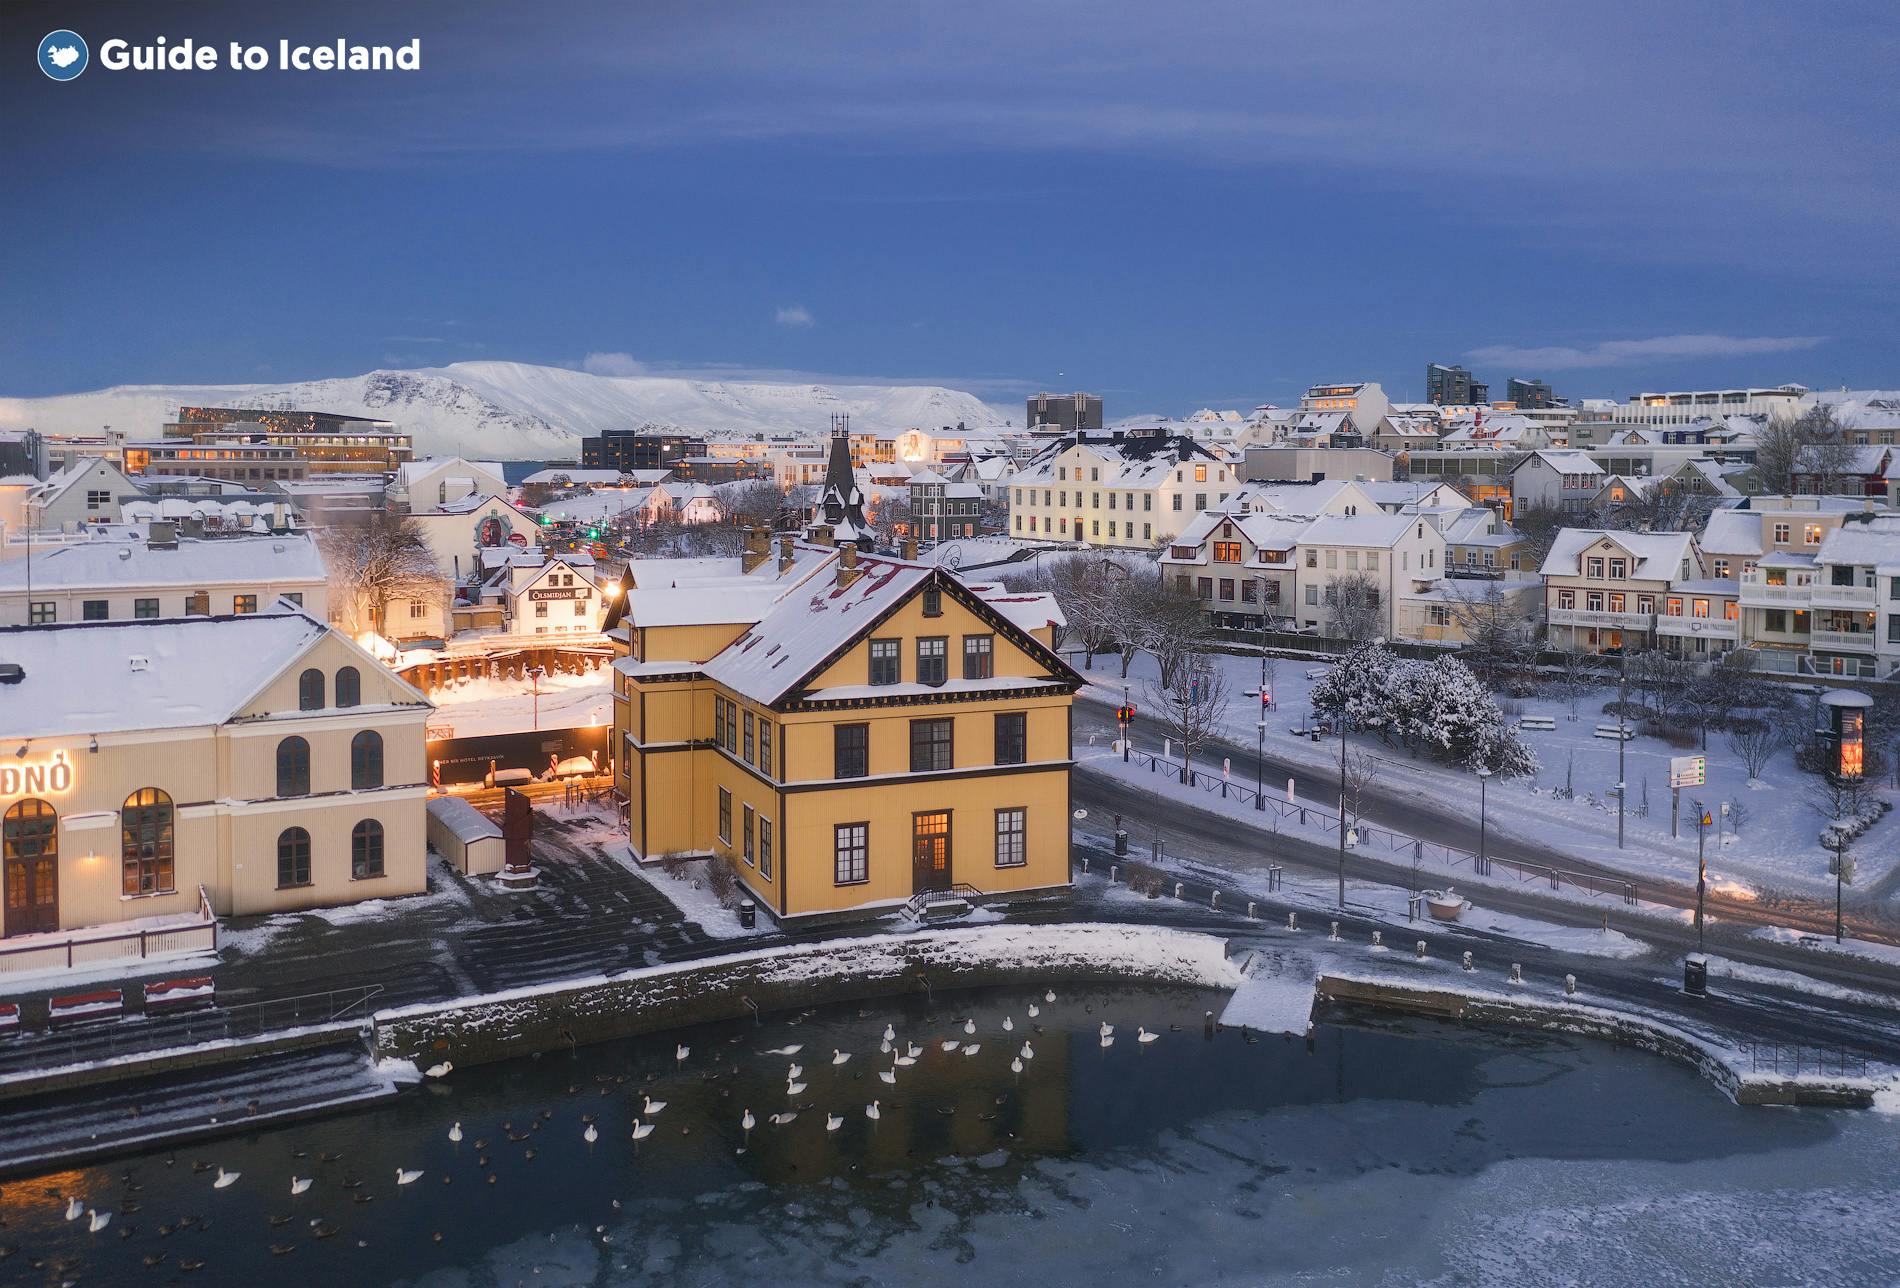 The city of Reykjavik blanketed in snow